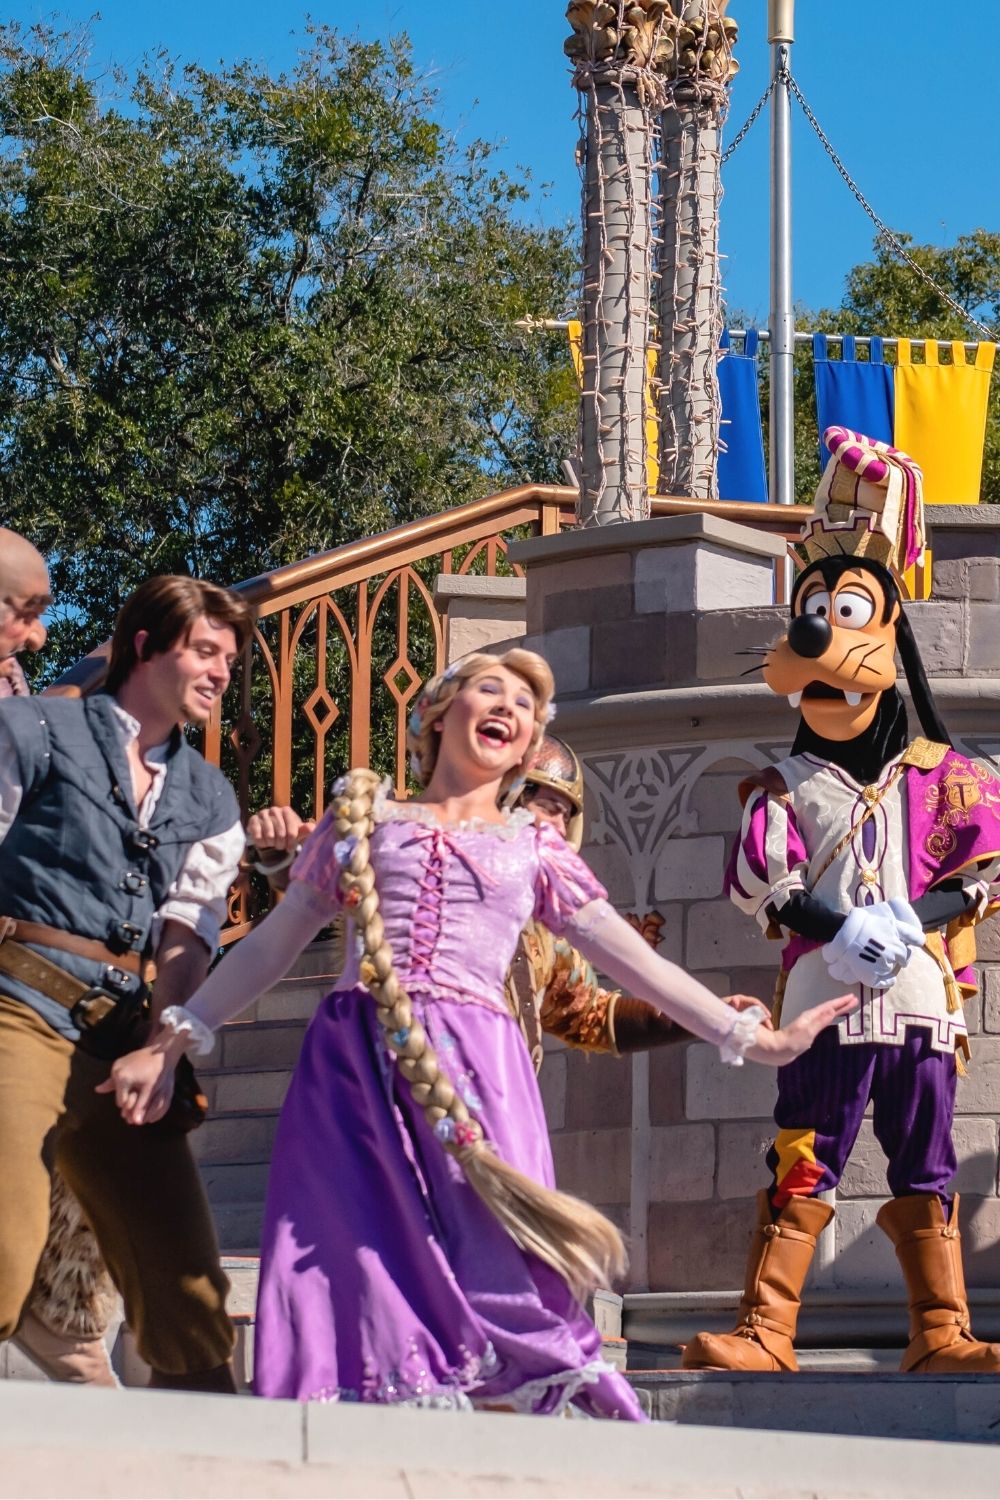 Rapnzel sings next to Flynn Rider and Goofy during a stage show at Magic Kingdom in Disney World